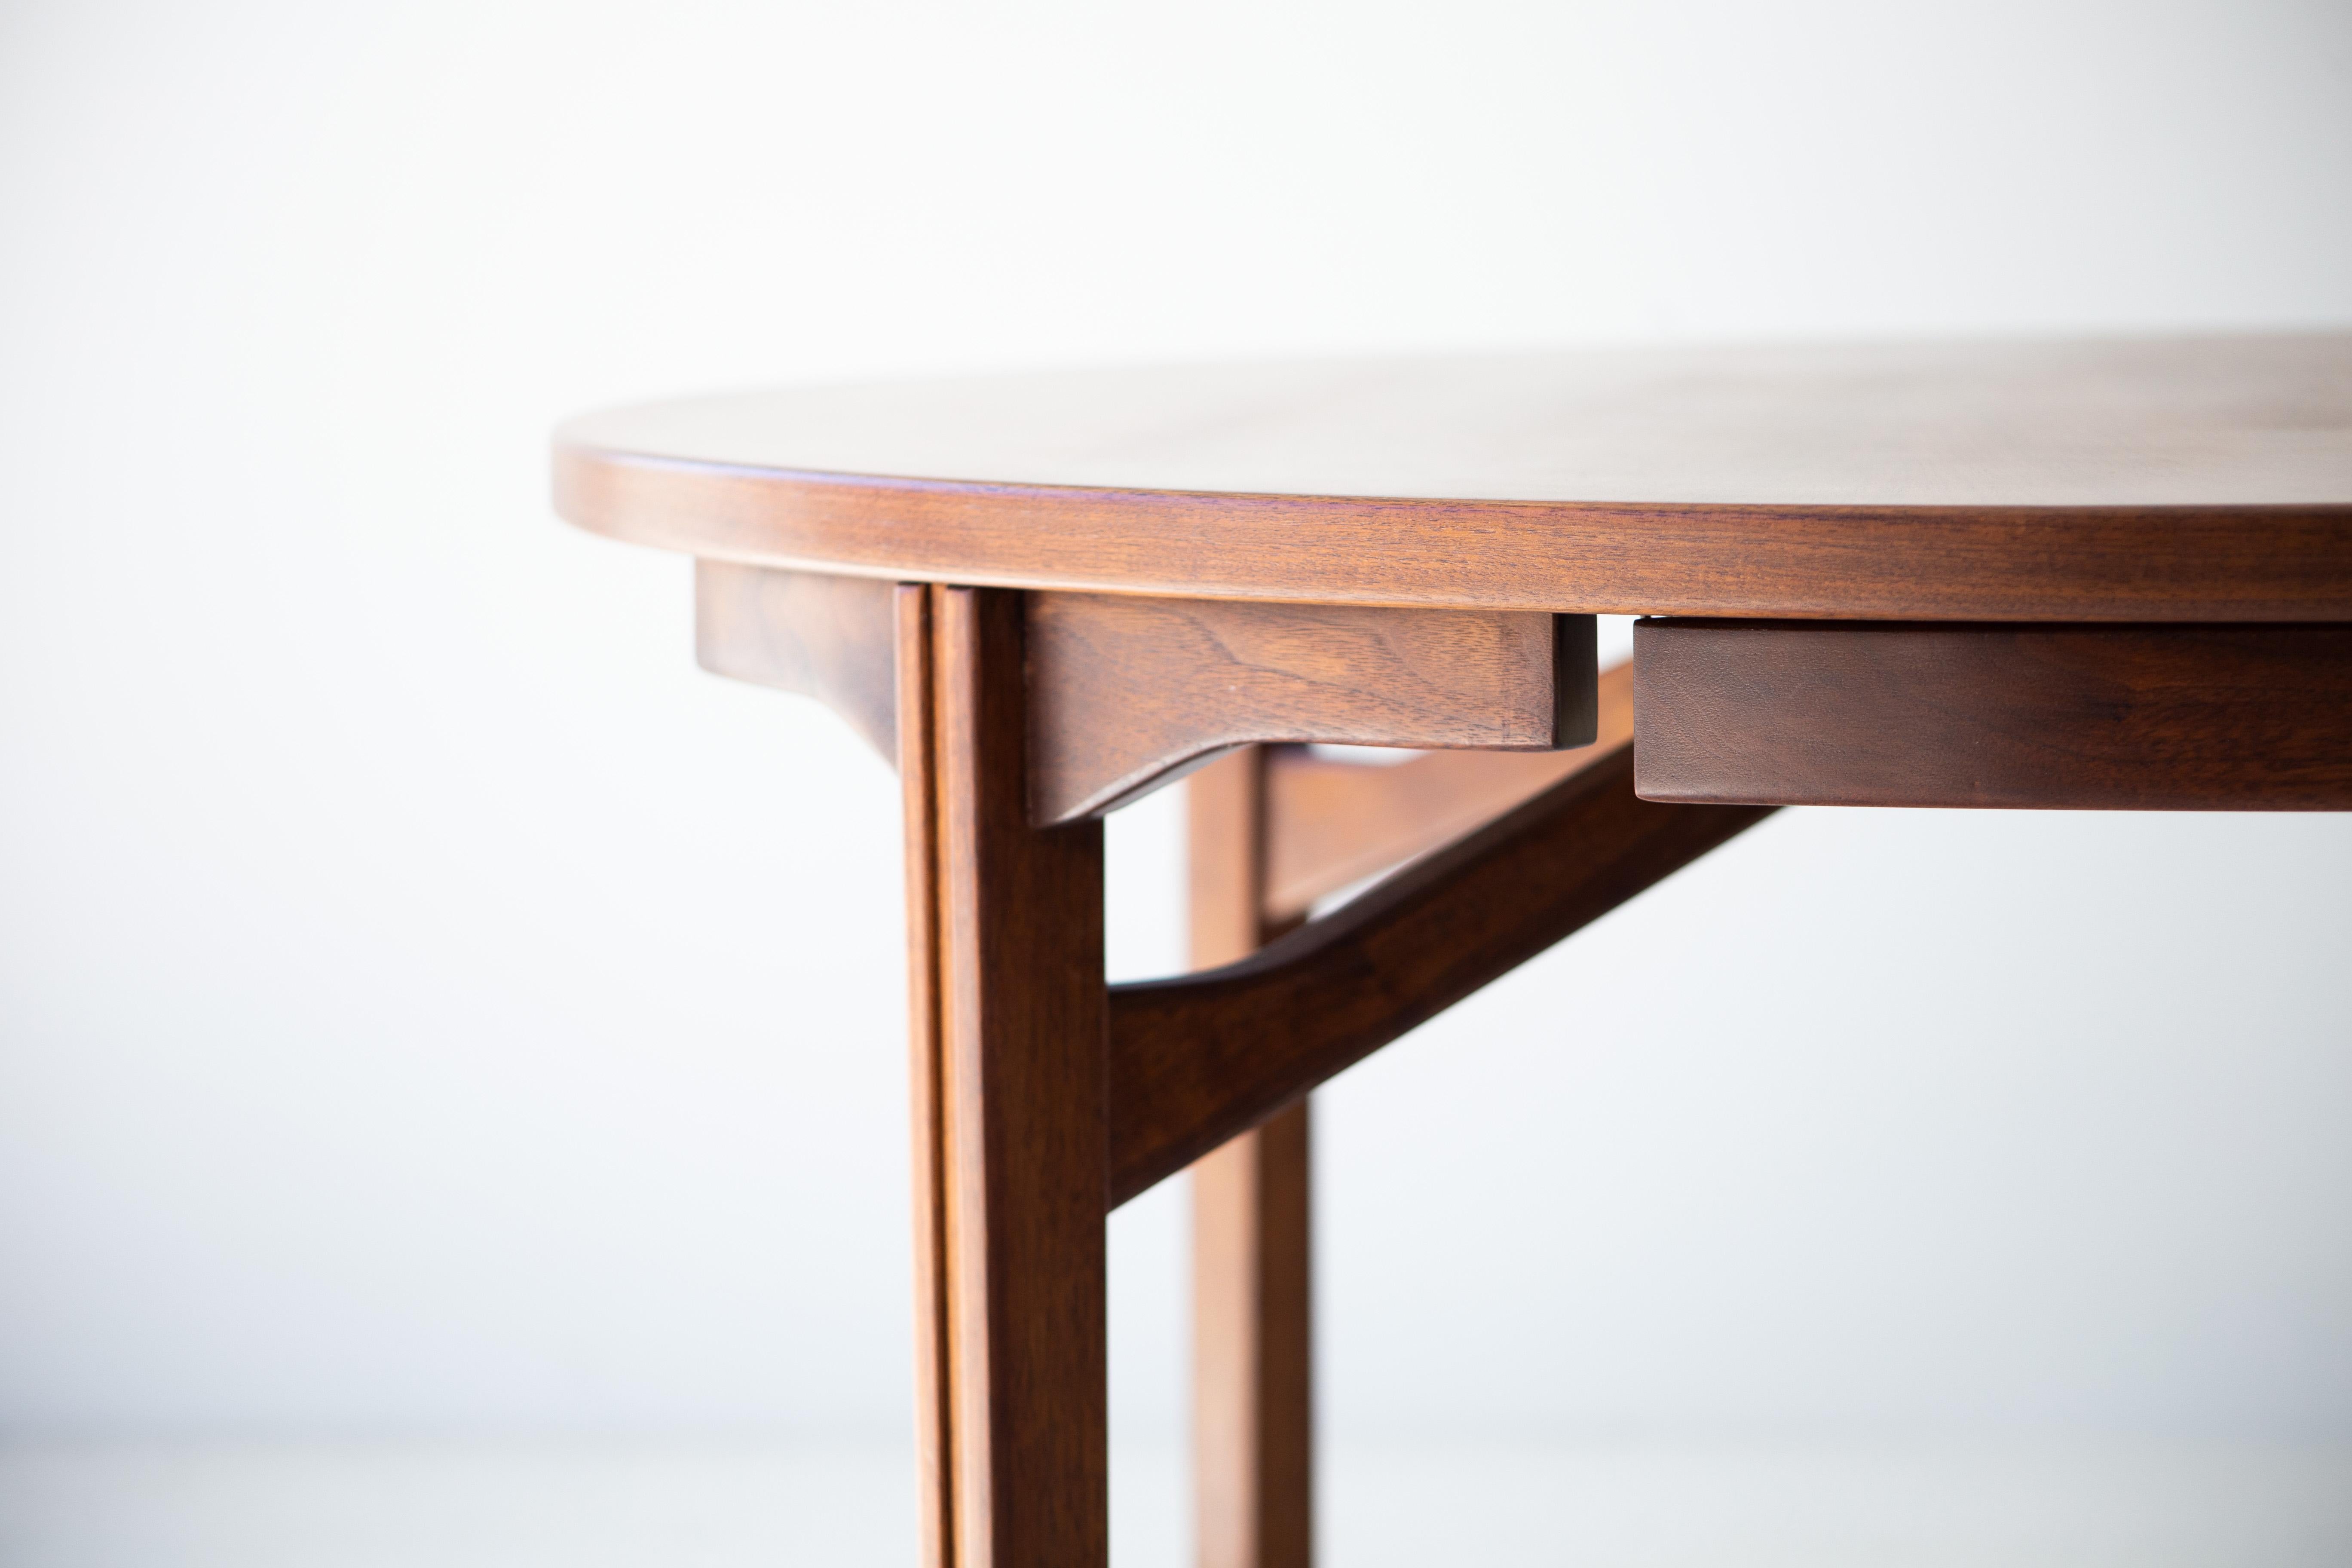 Designer: Jens Risom. 

Manufacturer: Jens Risom Design Inc. 
Period or model: Mid-Century Modern. 
Specs: Walnut, Brass

Condition: 

This Jens Risom dining table for Jens Risom Design Inc. is in restored condition. The wood has been